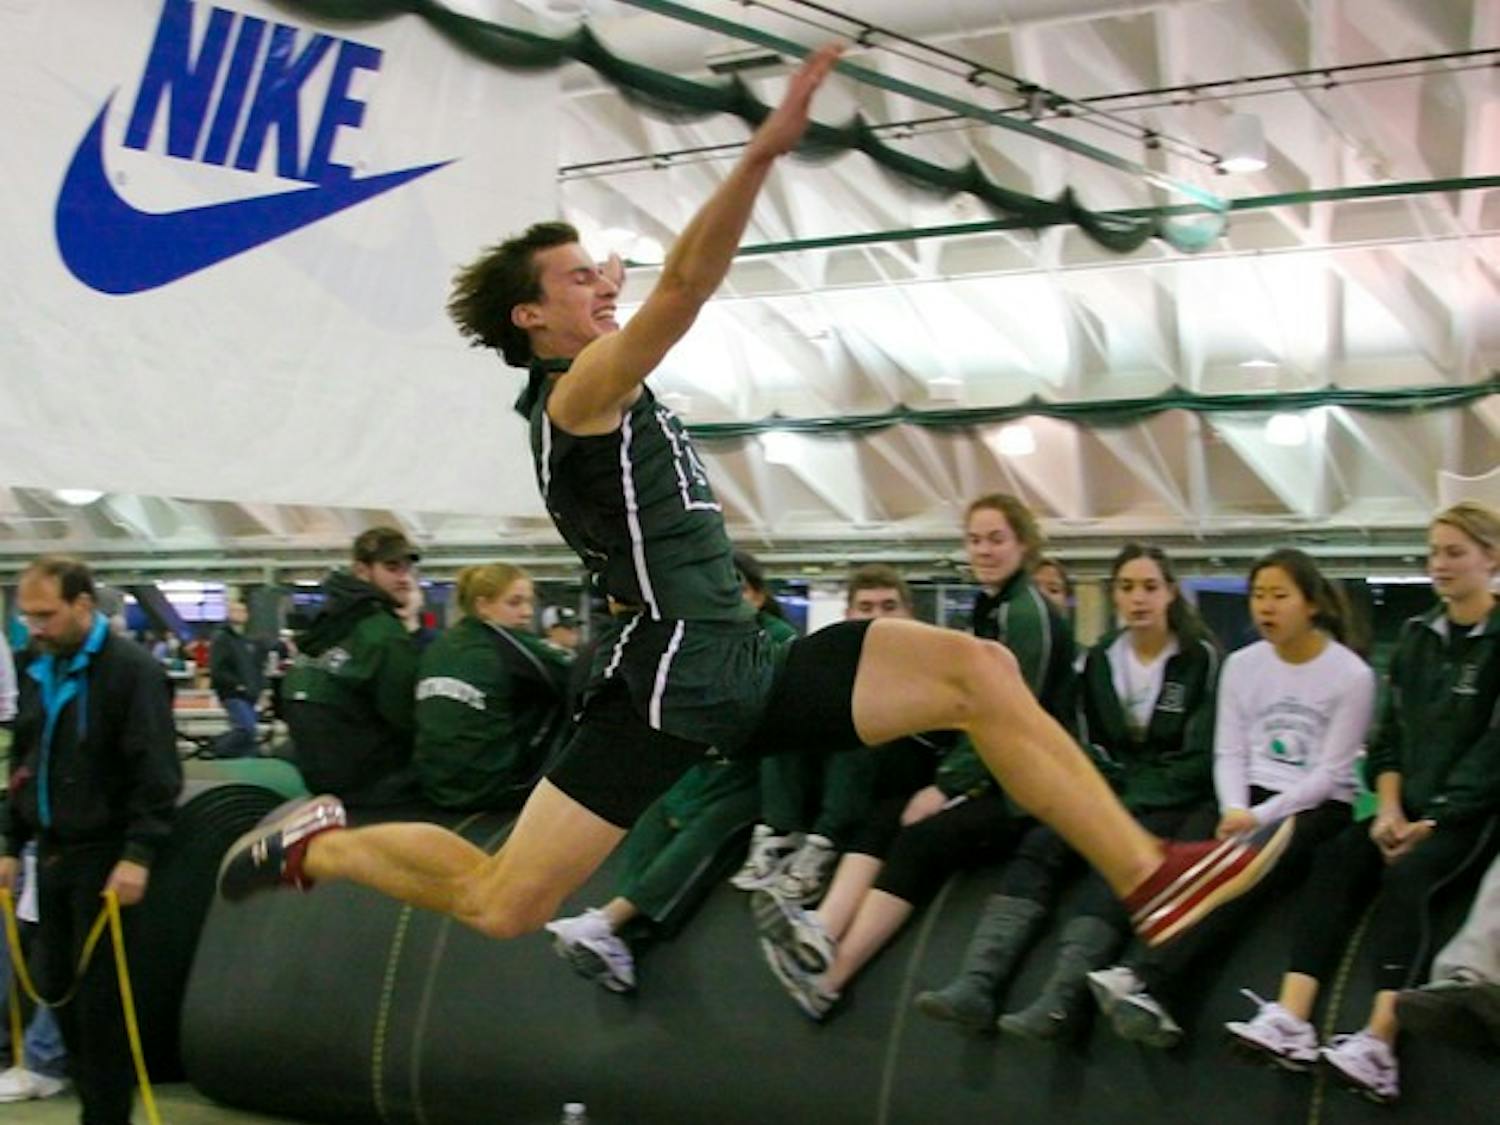 Several members of the Big Green men's track team will head to Boston, Mass. for the ICA4 meet this weekend after qualifying for the event at the Indoor Ivy League Heptagonal Championships.